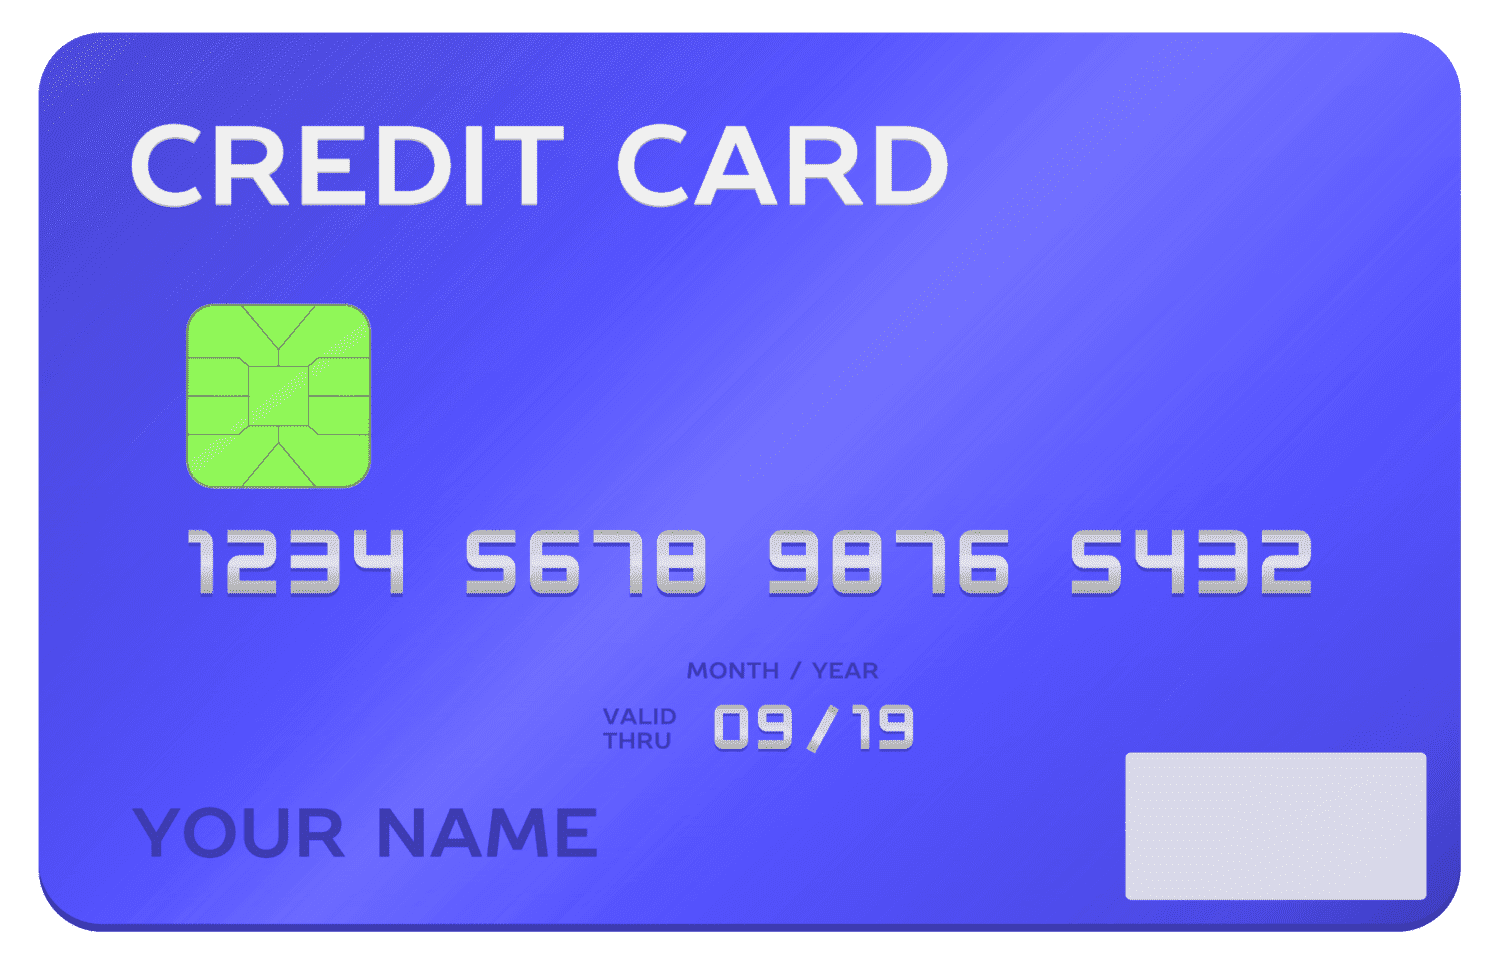 payment card